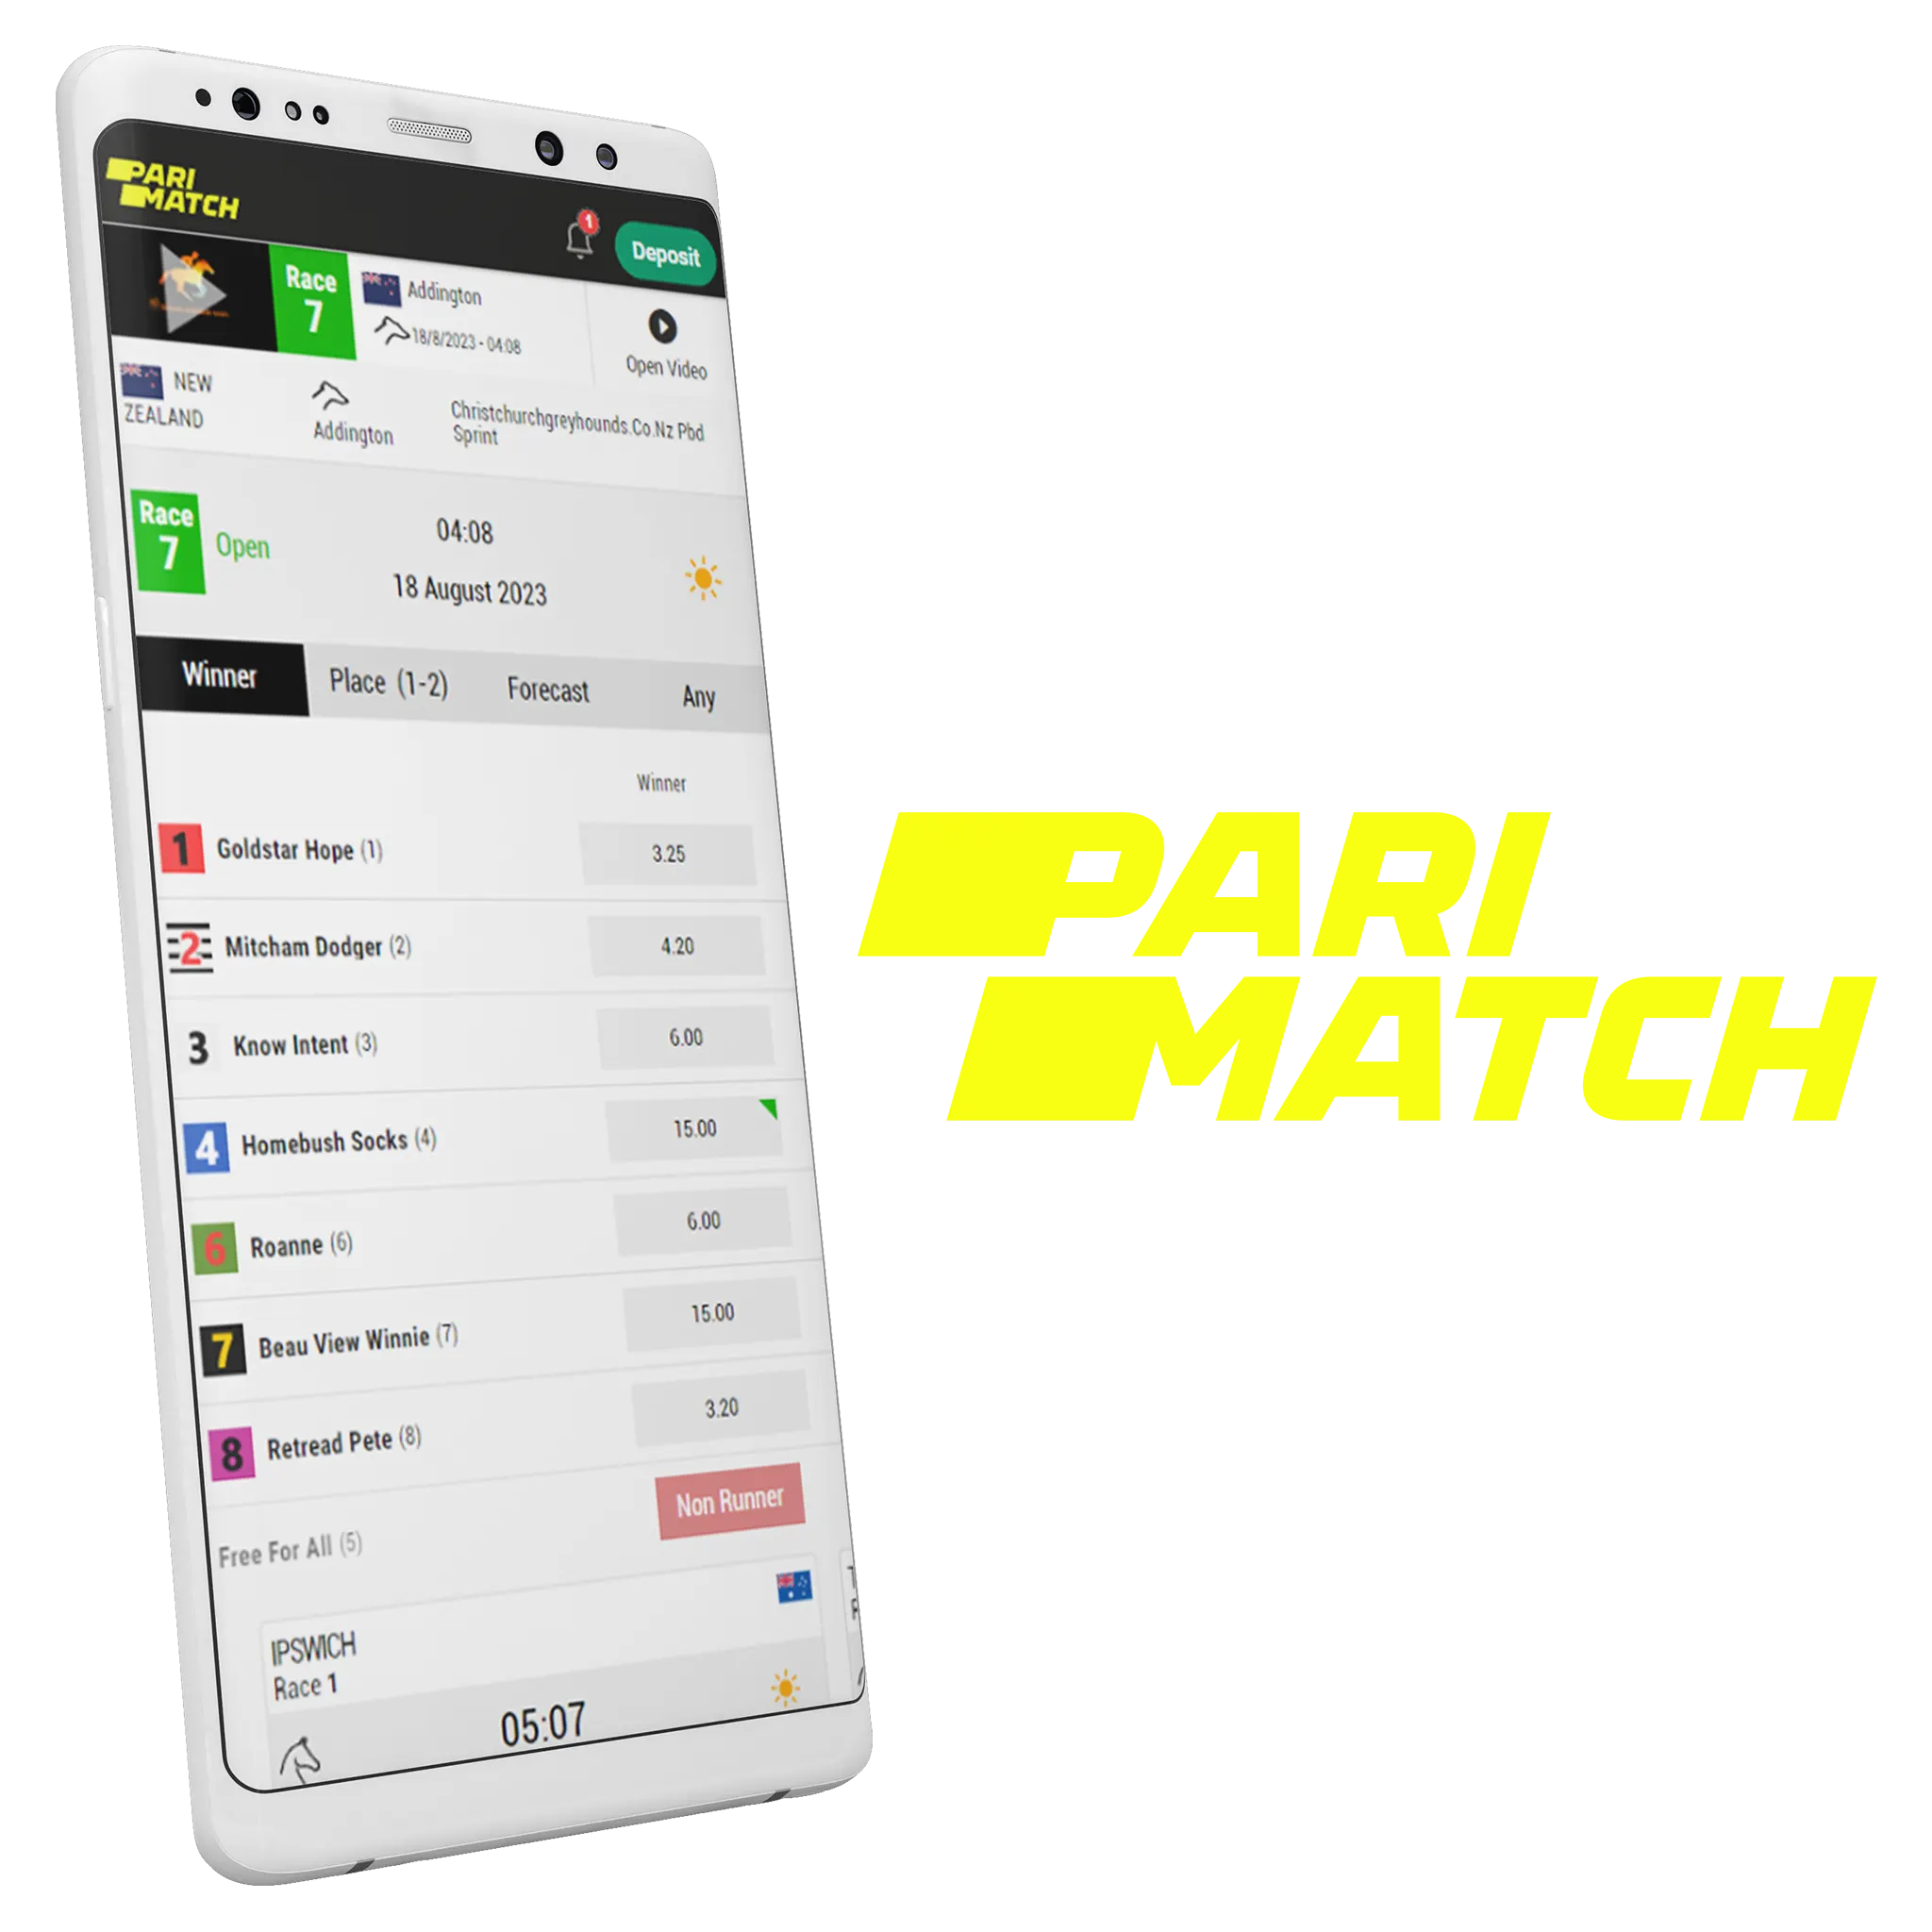 Parimatch app is easy to use even for beginners to place bets on horse racing.